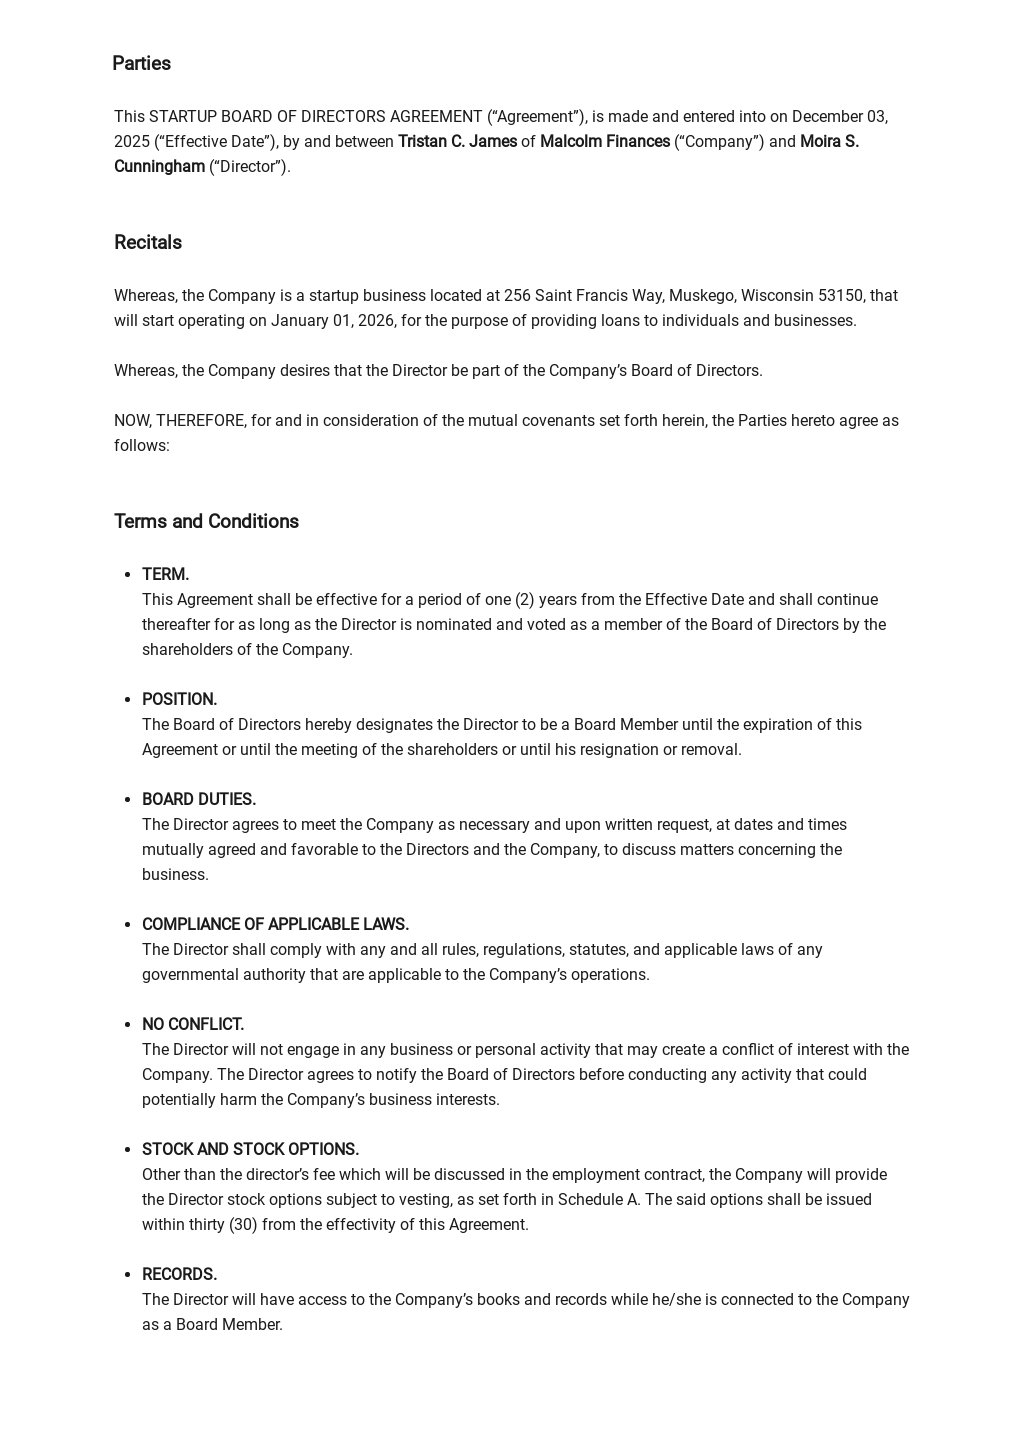 FREE Startup Board of Directors Agreement Template in Google Docs, Word